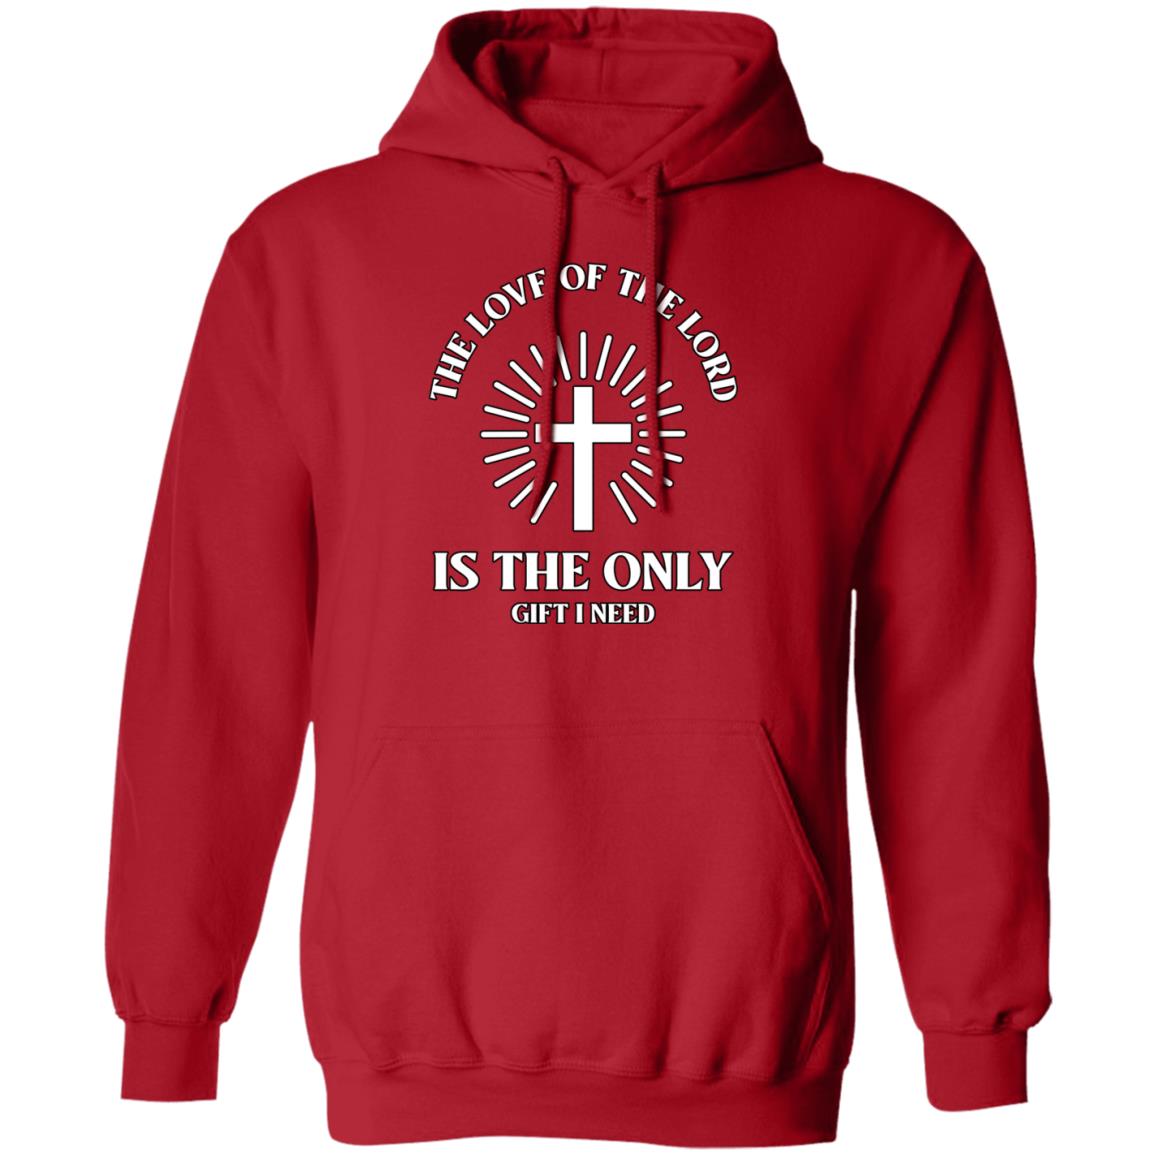 The Love of the Lord (Unisex Hoodie)